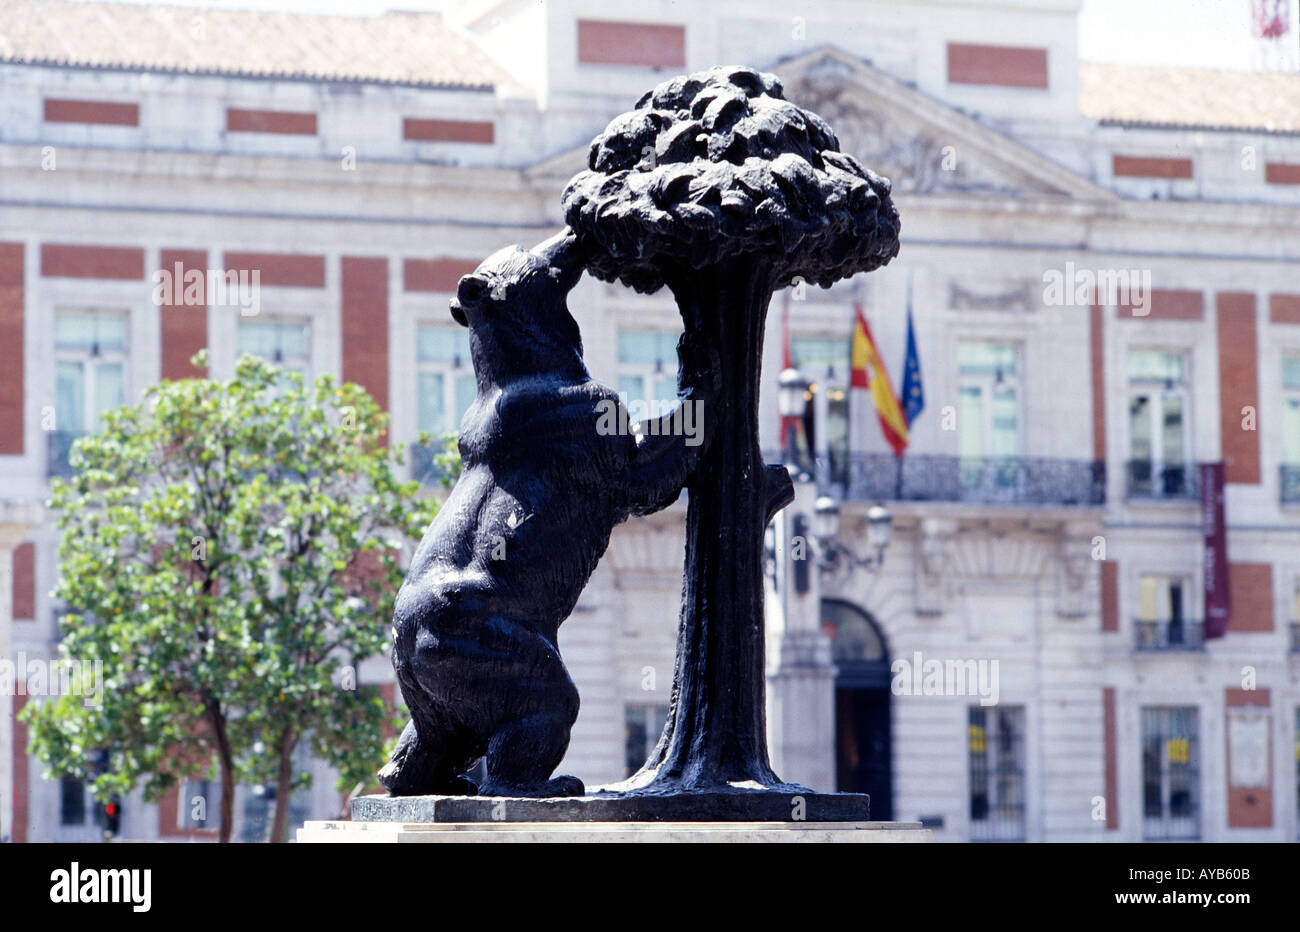 The Bear and the Madrono tree which has been a symbol of the city since medieval times Stock Photo